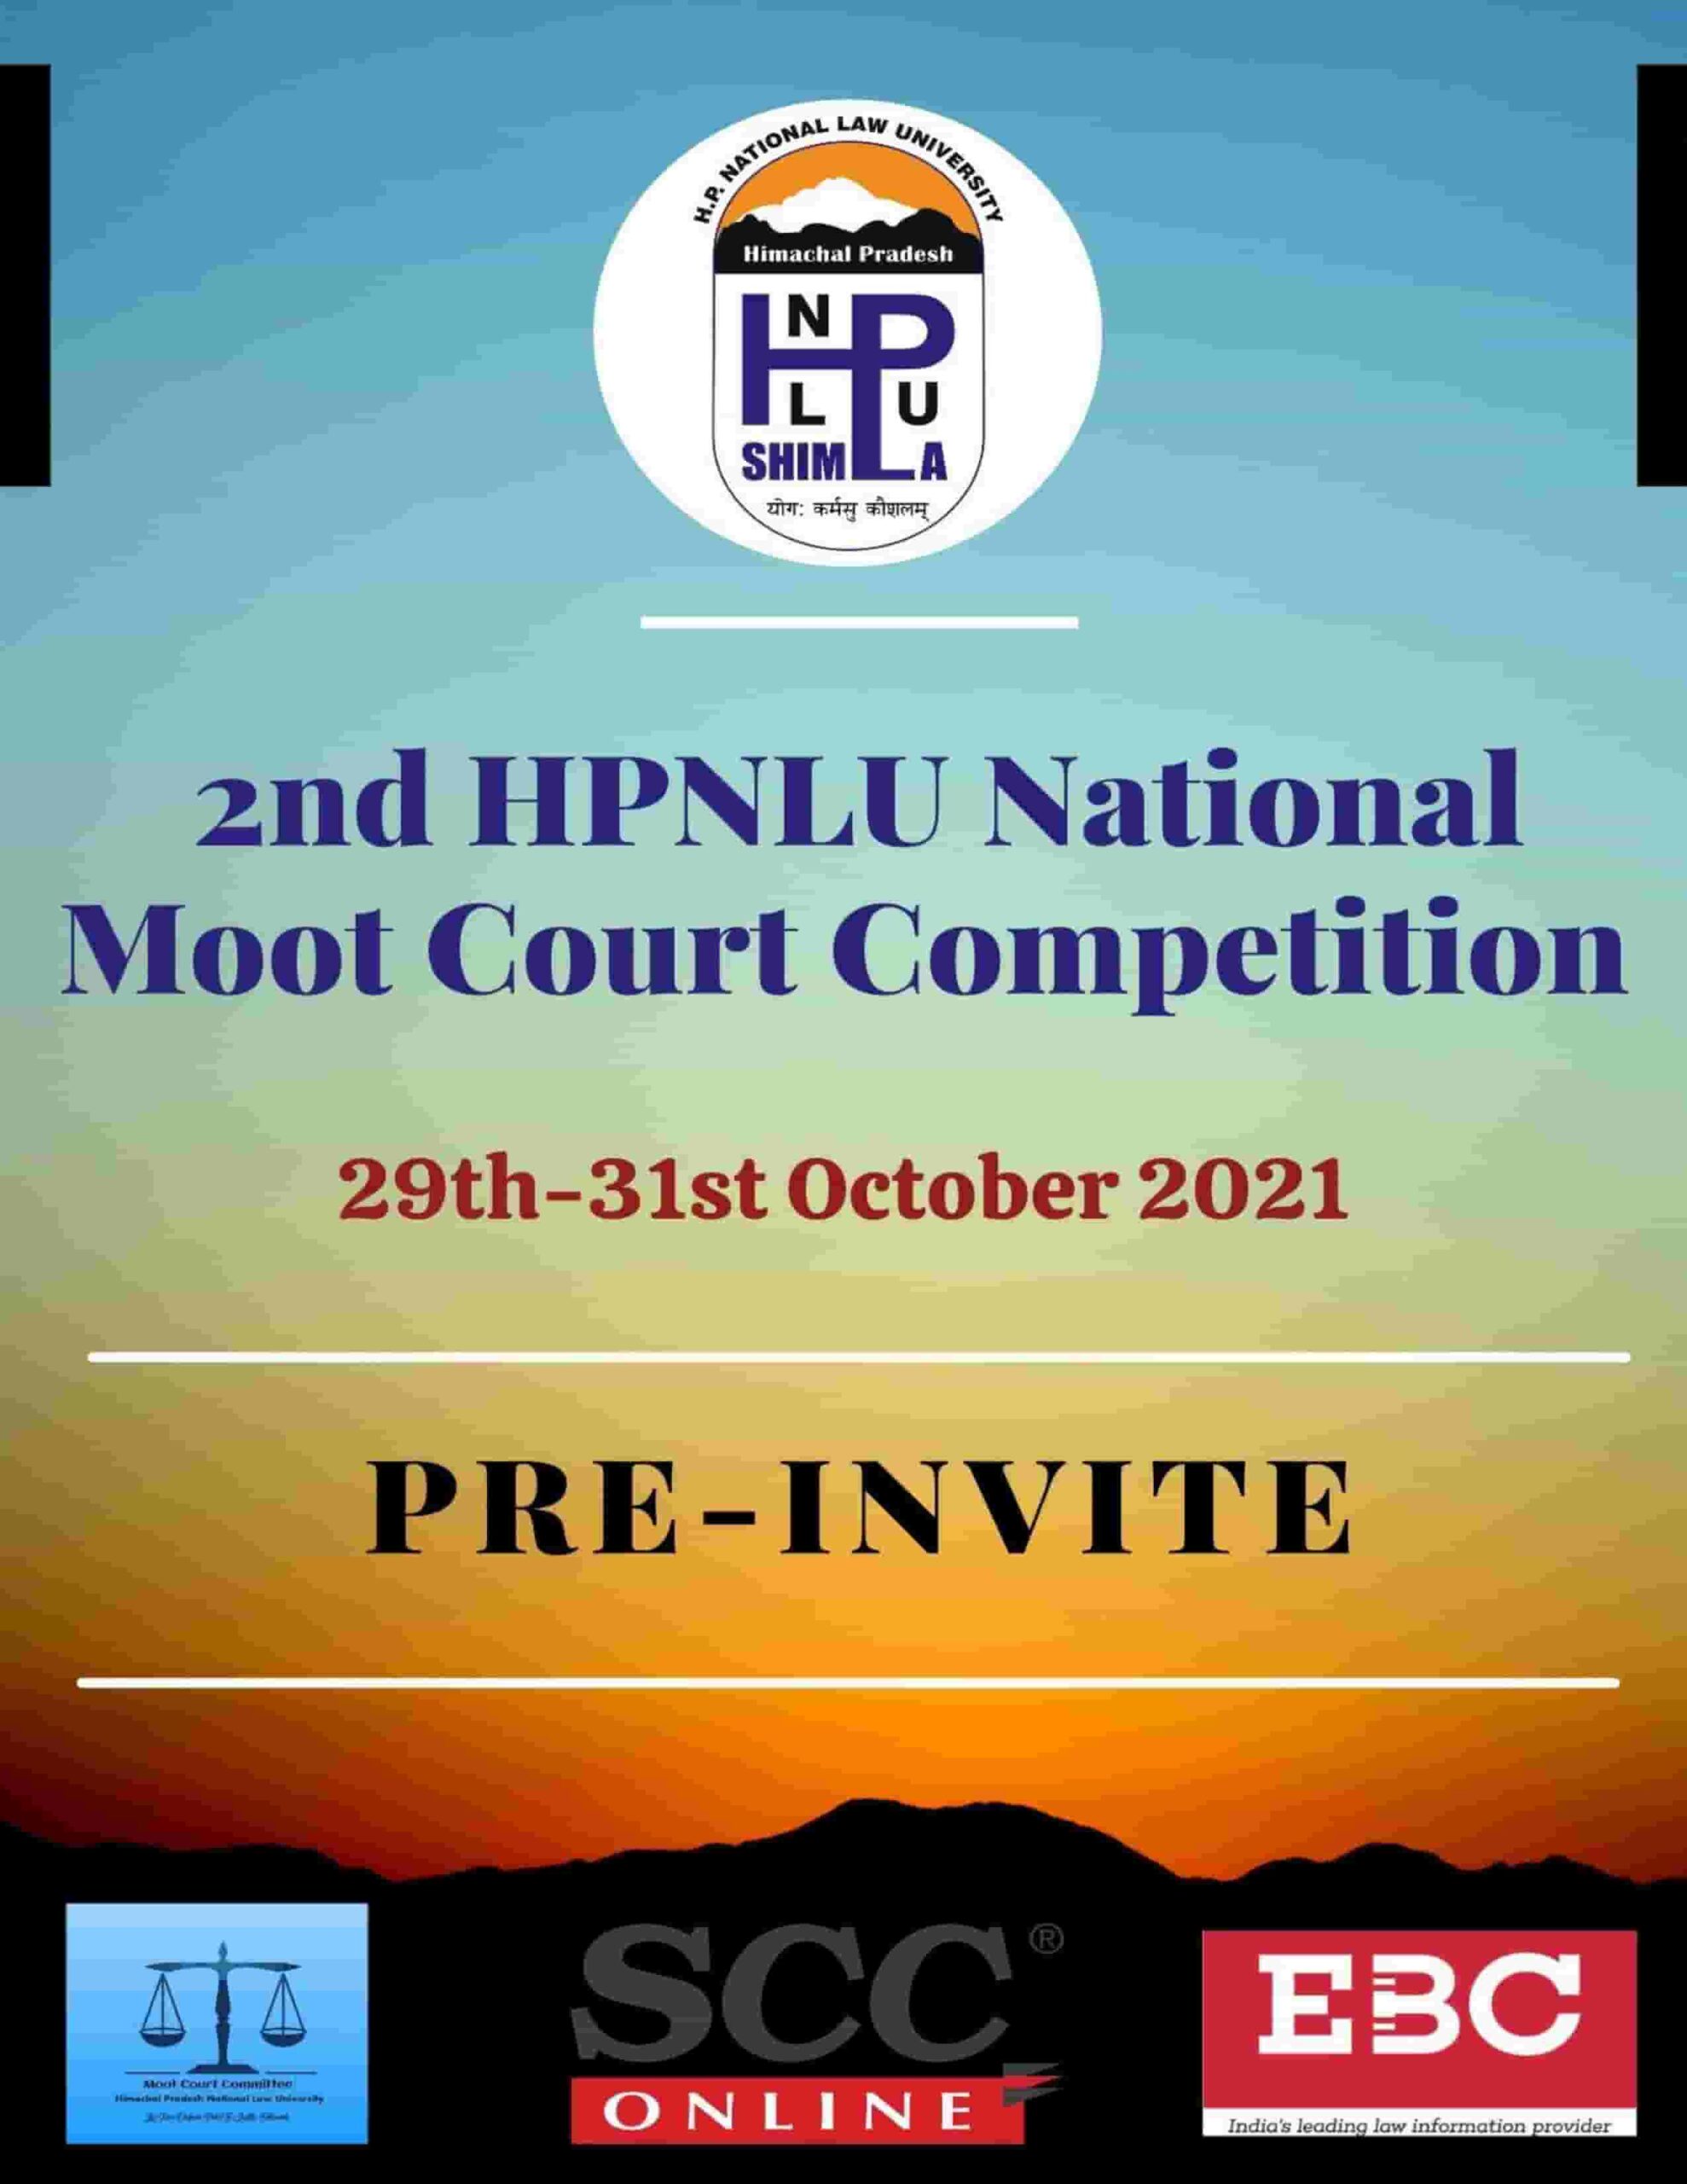 HPNLU National Moot Court Competition [October 29-31, 2020]: Registrations Open